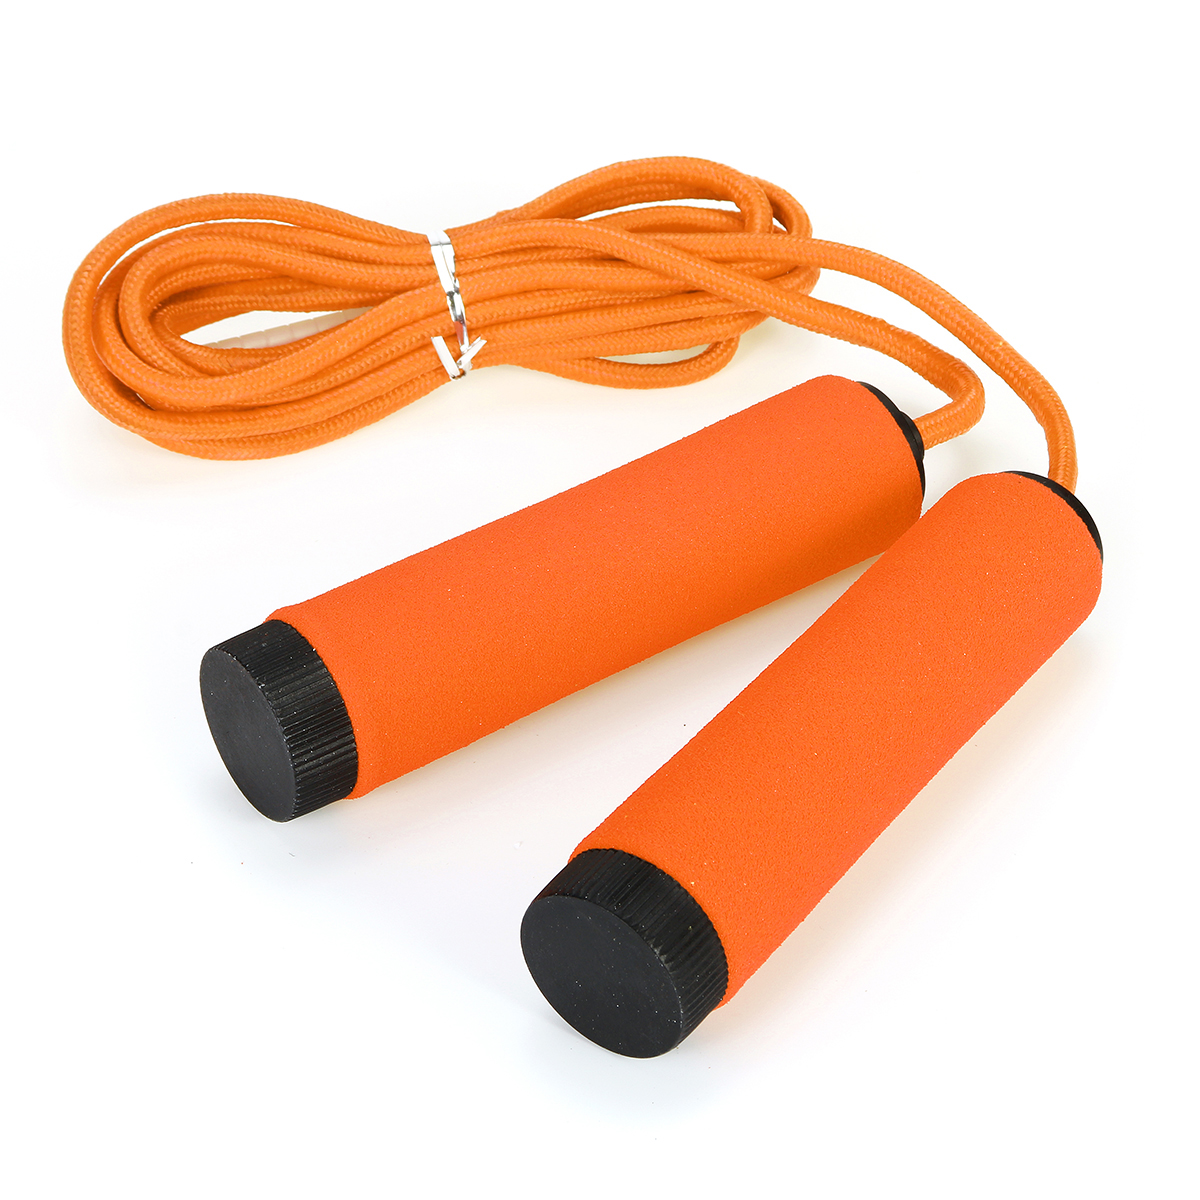 3PcsSet-Skipping-Rope-Fitness-Heavy-Hand-Gripper-Dumbbells-Muscle-Strength-Training-Tools-1692559-8